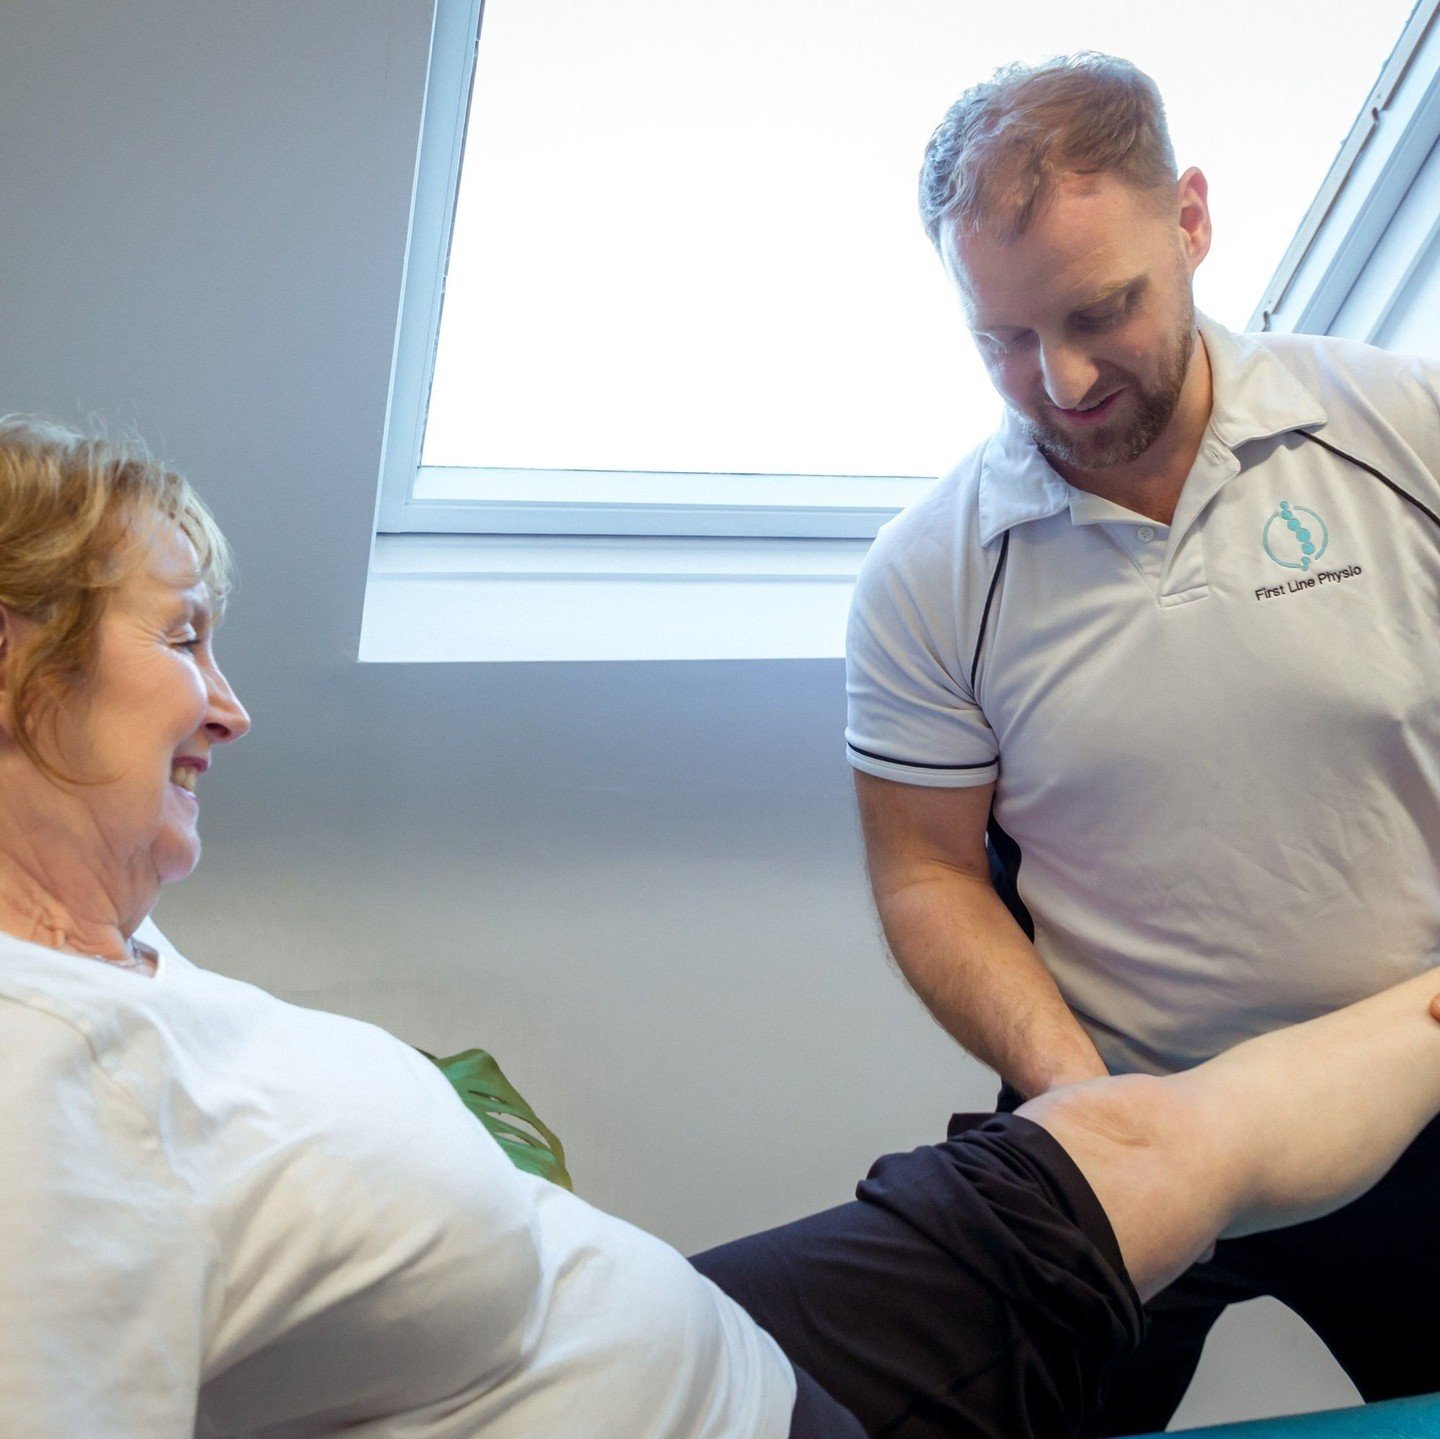 🦵Arthritis in the knees is more common than you think. ⁠
⁠
🏃⁠ Knee osteoarthritis (OA) frequently presents with pain, stiffness, and the inability to carry out day to day activities. An estimated 5.4 million people in the UK are affected by Osteoar